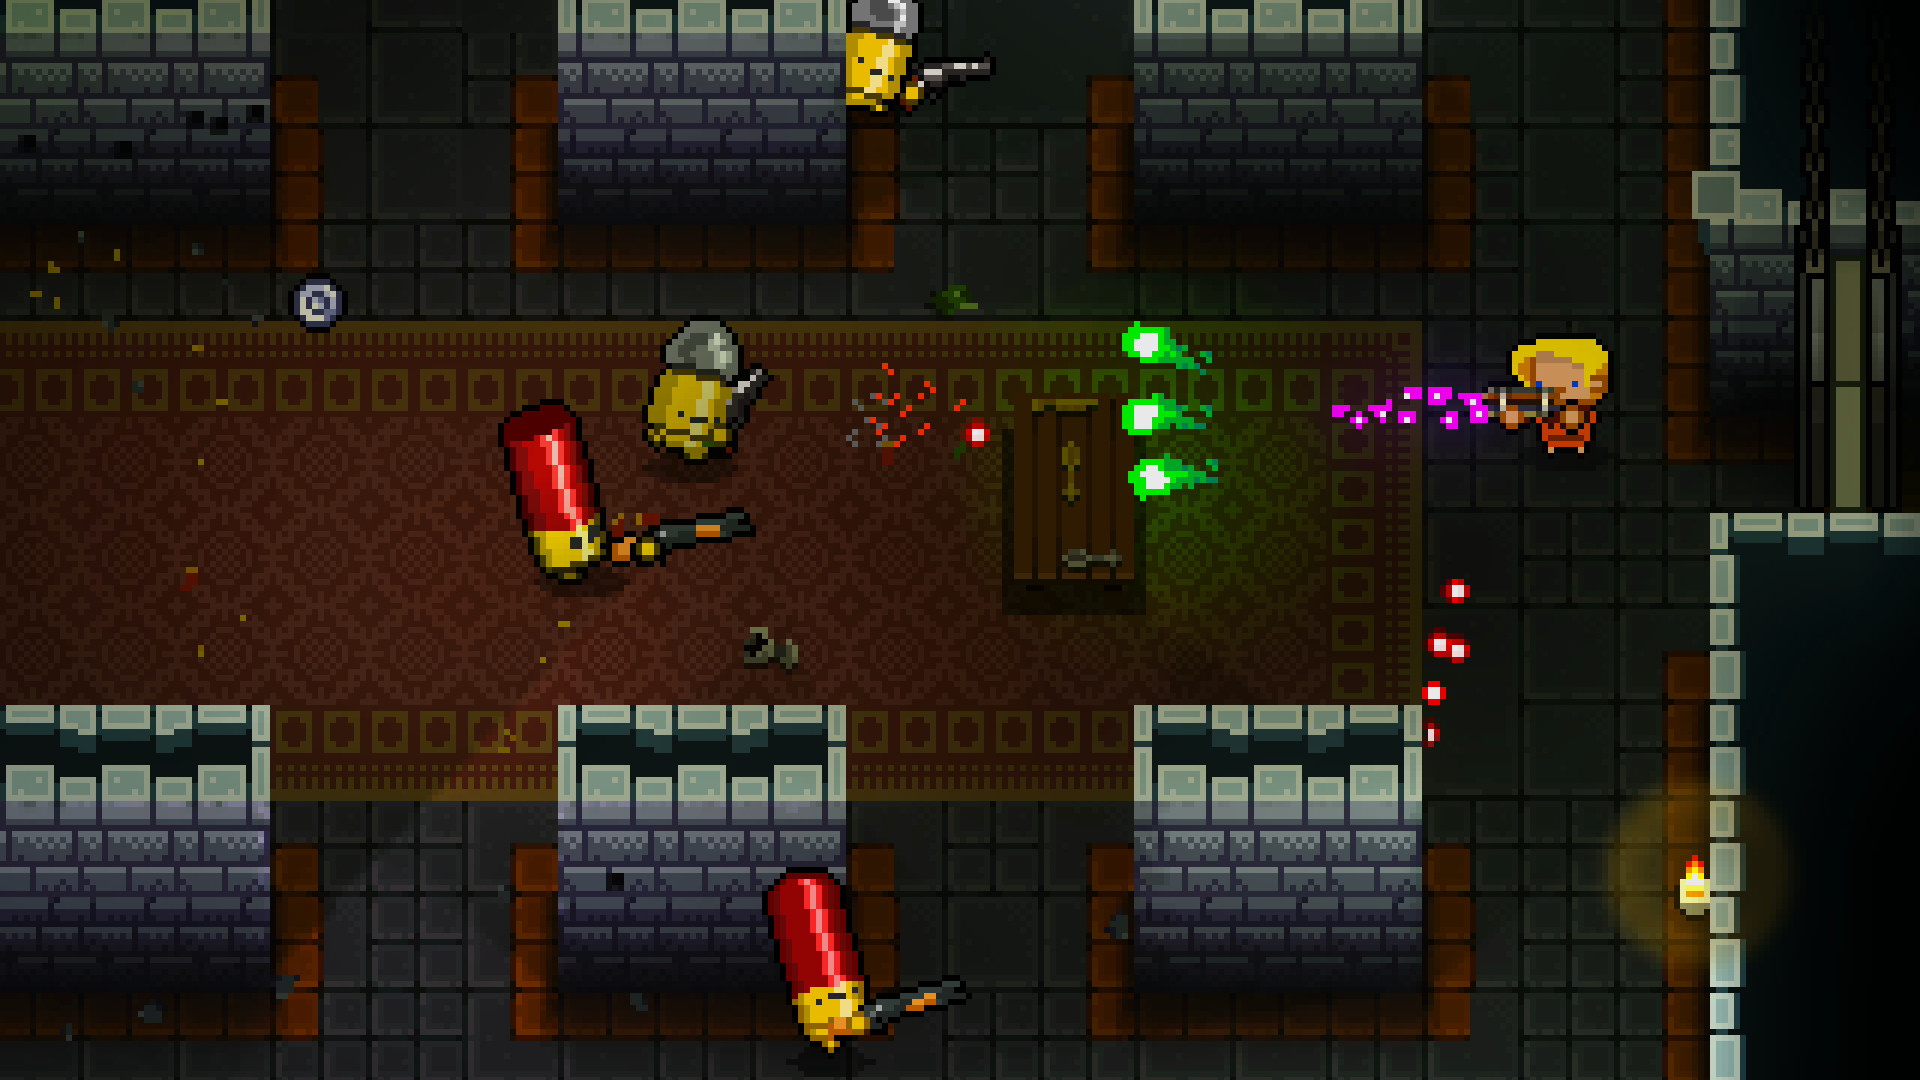 download games like enter the gungeon for free